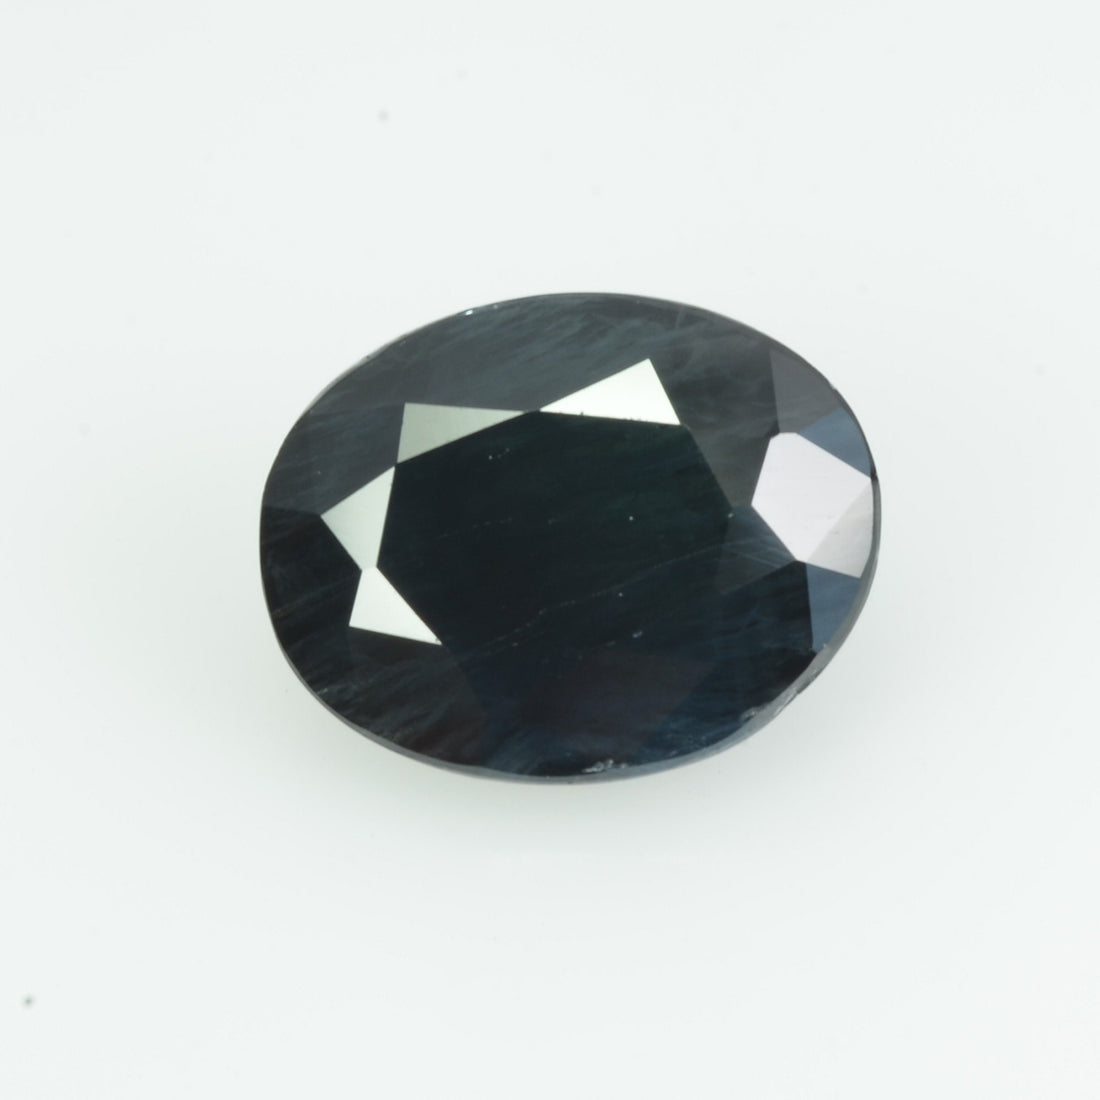 2.23 cts Natural Blue Sapphire Loose Gemstone Oval Cut